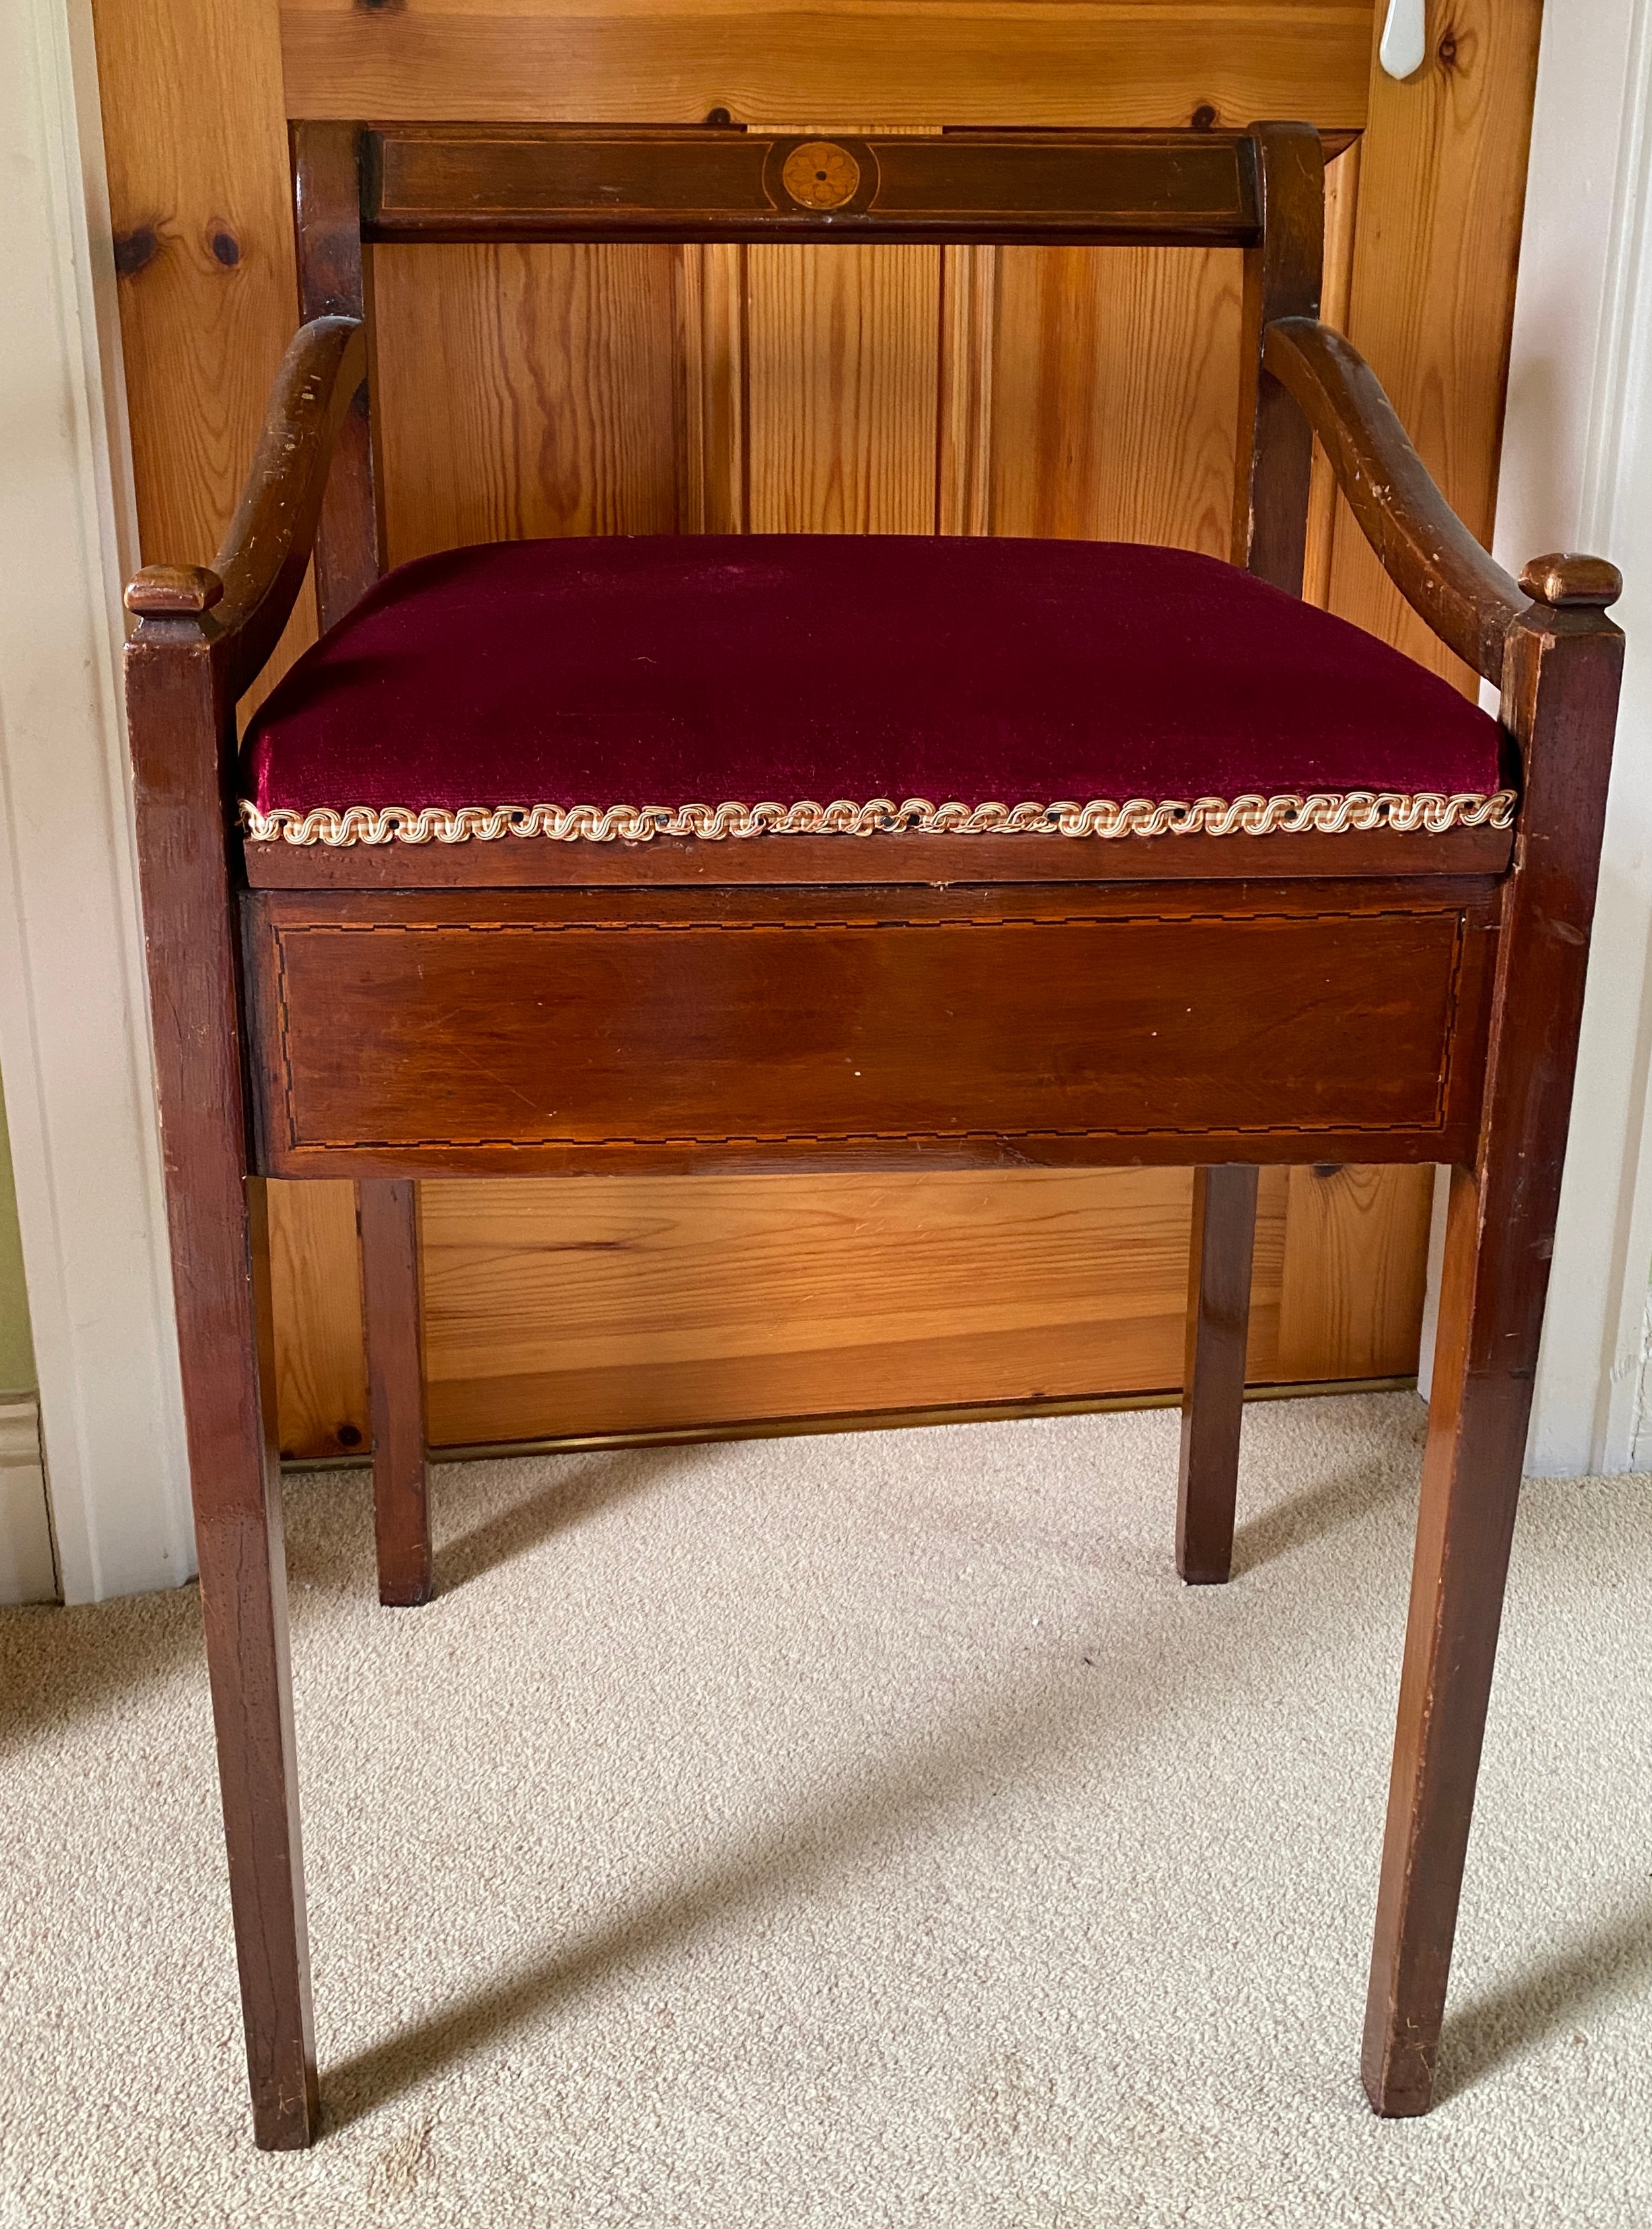 An Edwardian mahogany inlaid piano stool with arms and lift up seat.